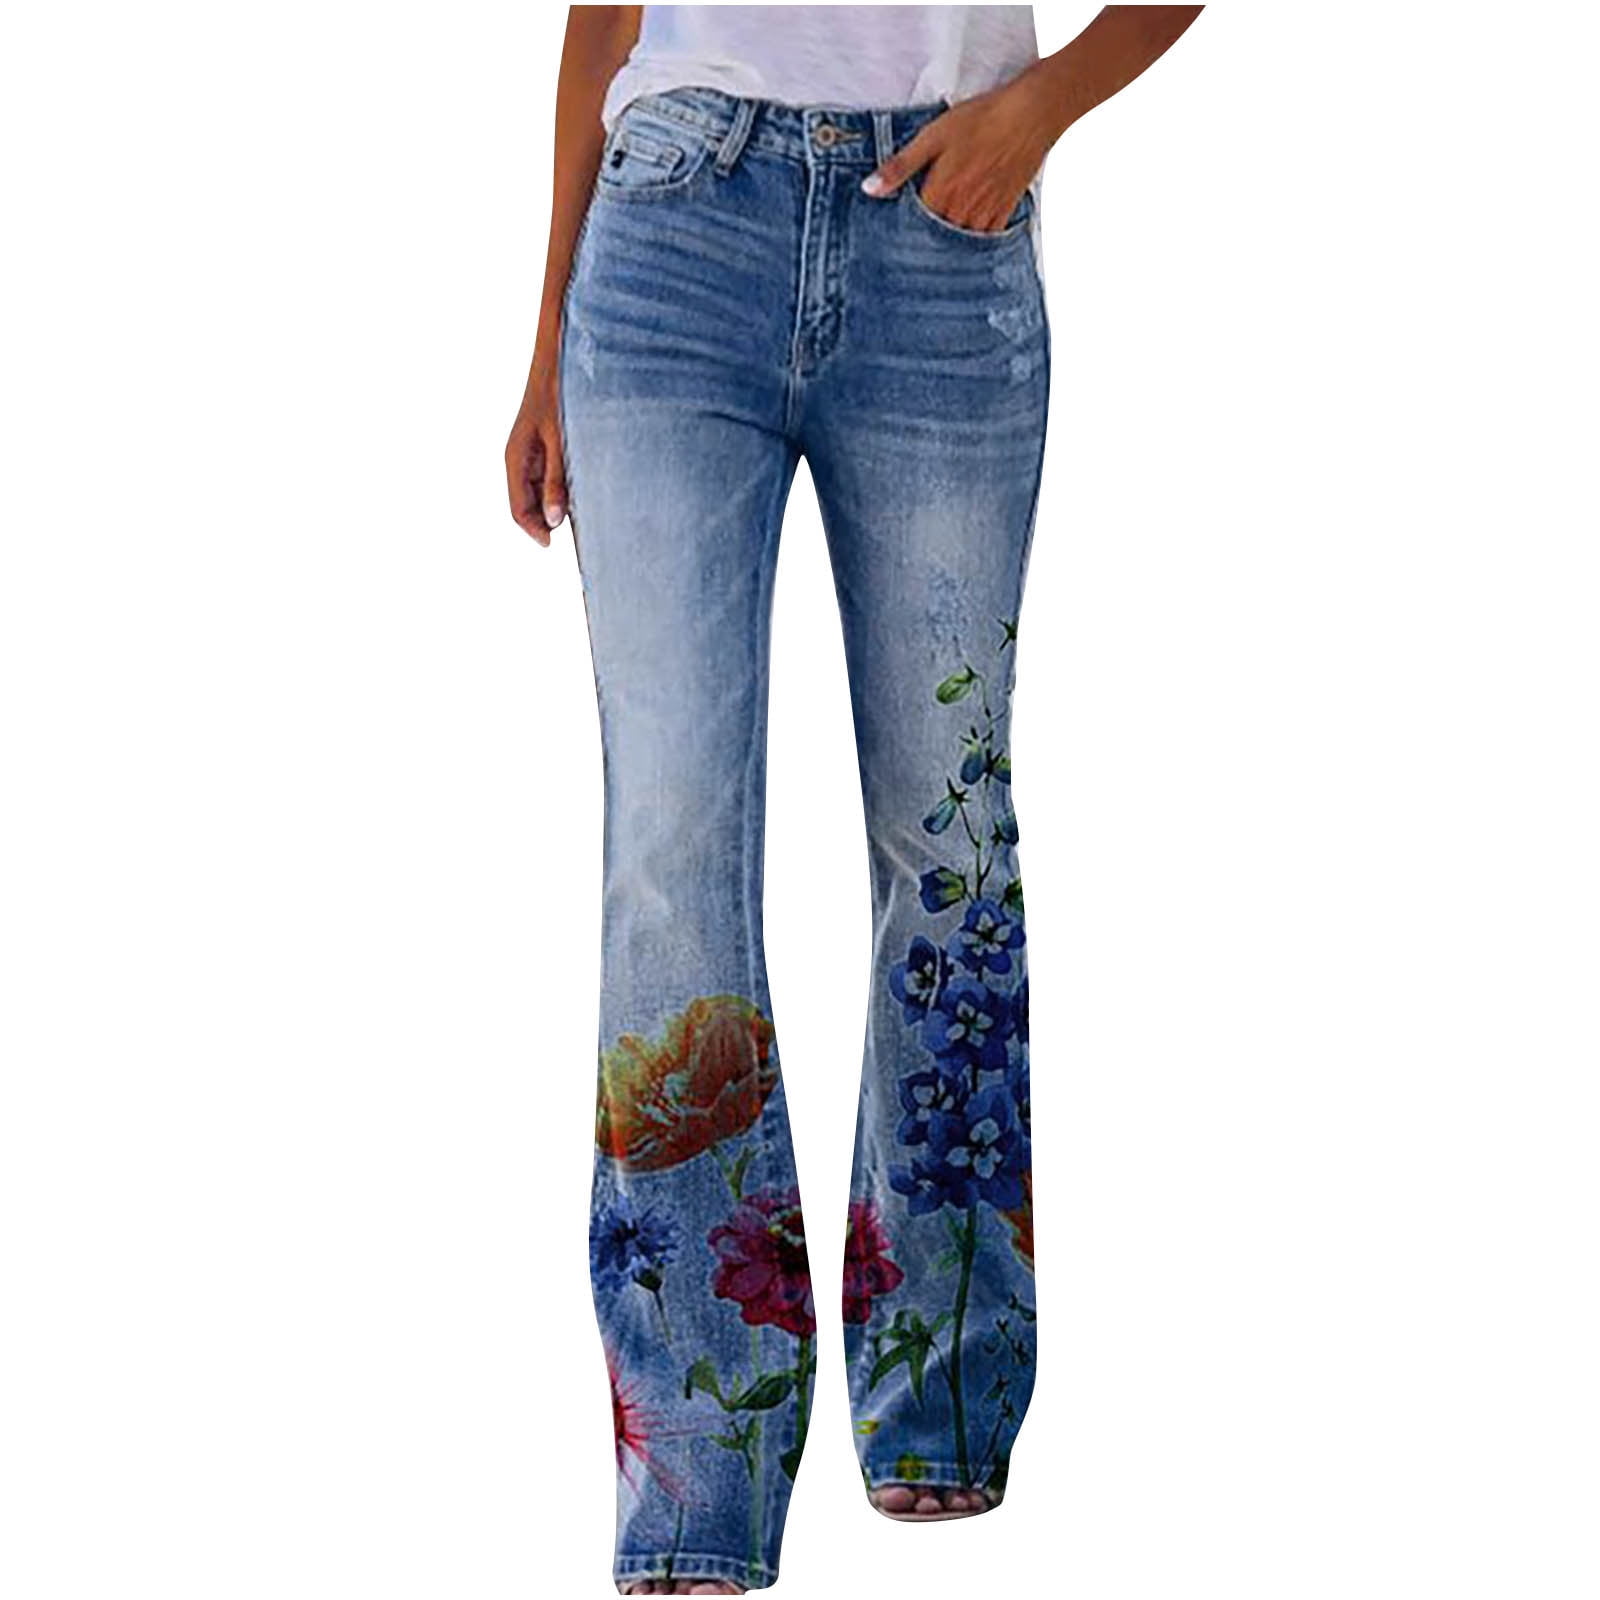 YYDGH Womens Floral Lace Flare Jeans High Waisted Stretch Bell